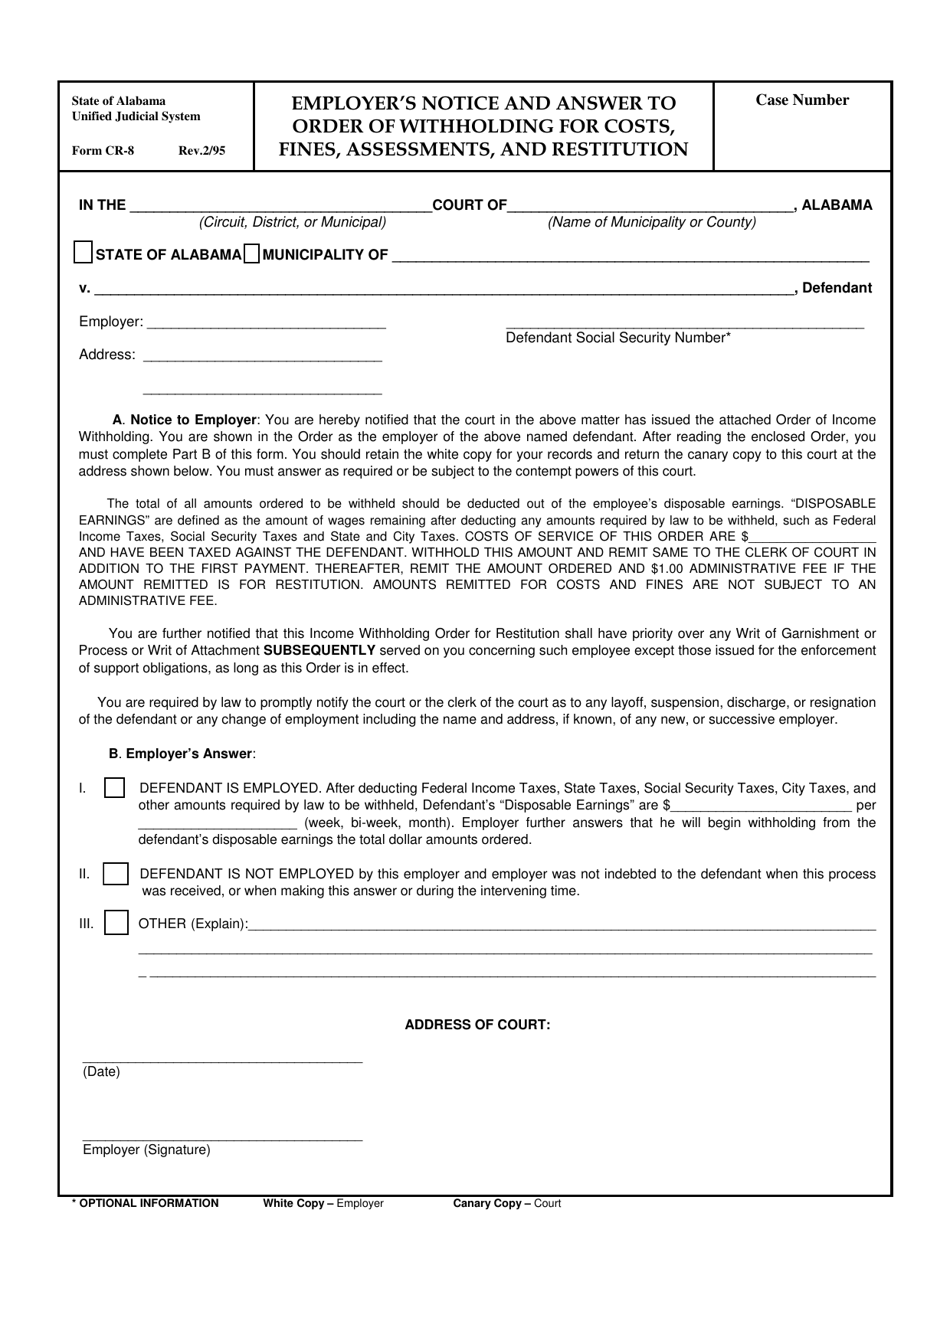 Form CR-8 Employers Notice and Answer to Order of Withholding for Costs, Fines, Assessments, and Restitution - Alabama, Page 1